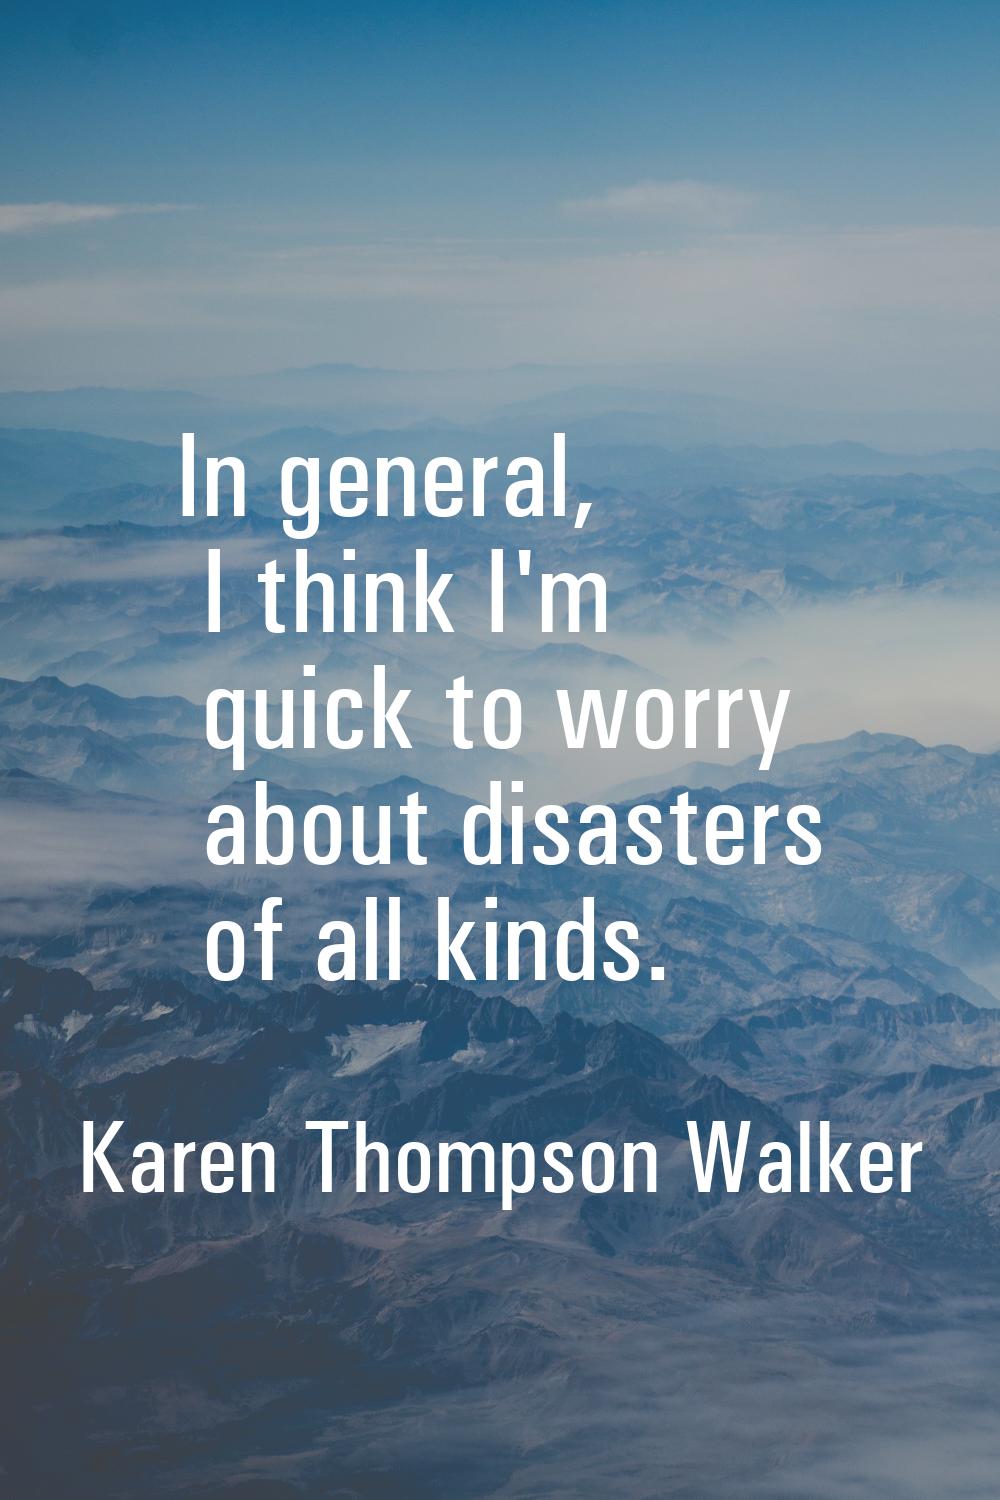 In general, I think I'm quick to worry about disasters of all kinds.